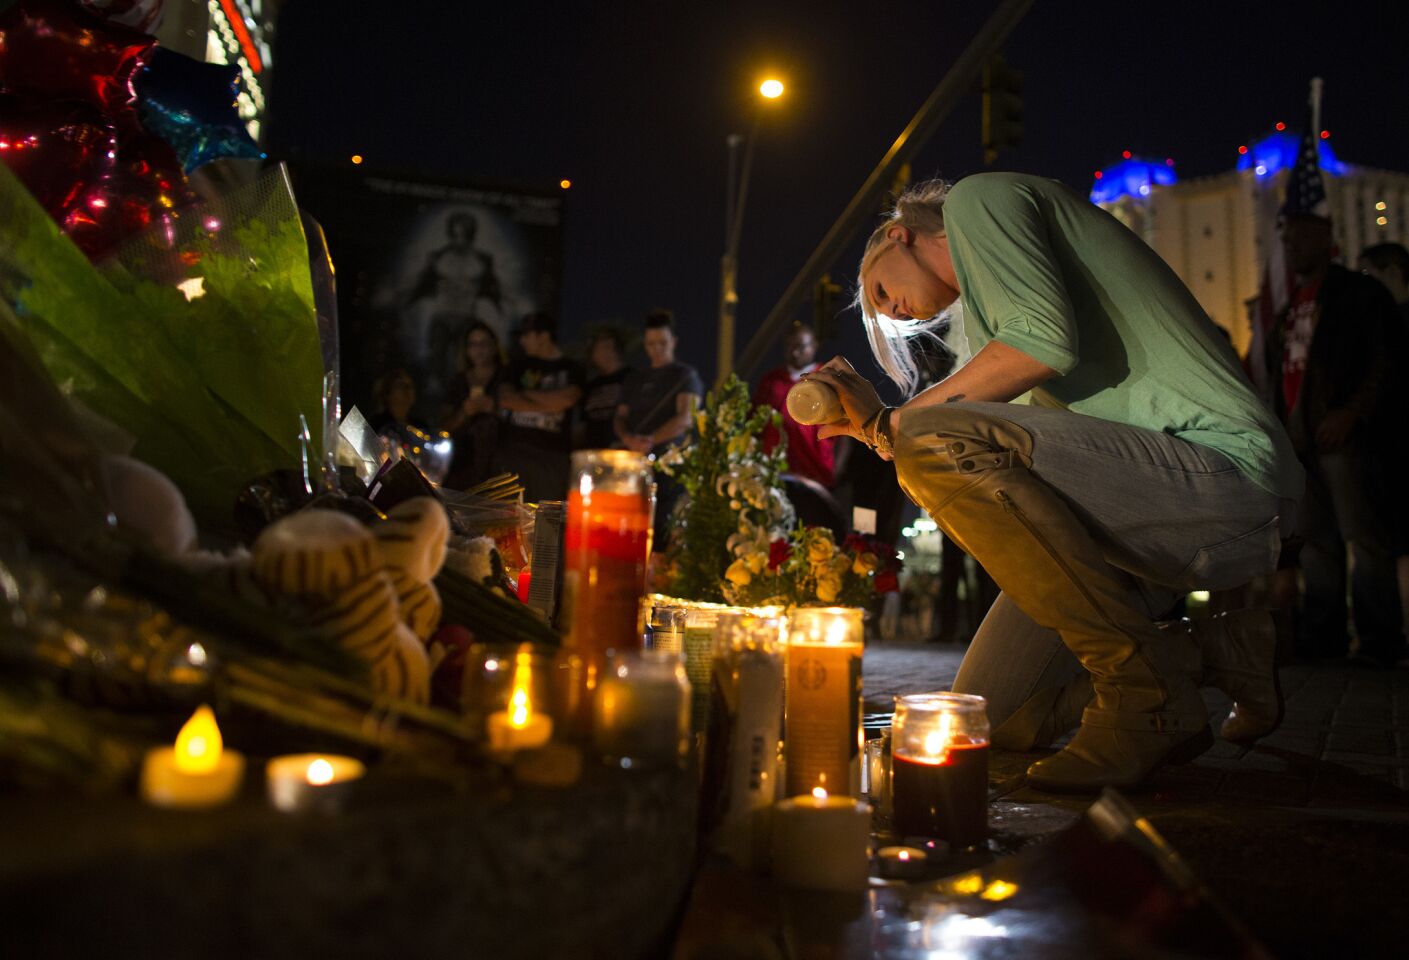 Kaili Berdge of Scottsdale, Ariz. makes sure every candle stays lit at a memorial for the victims of the mass shooting near the crime scene .